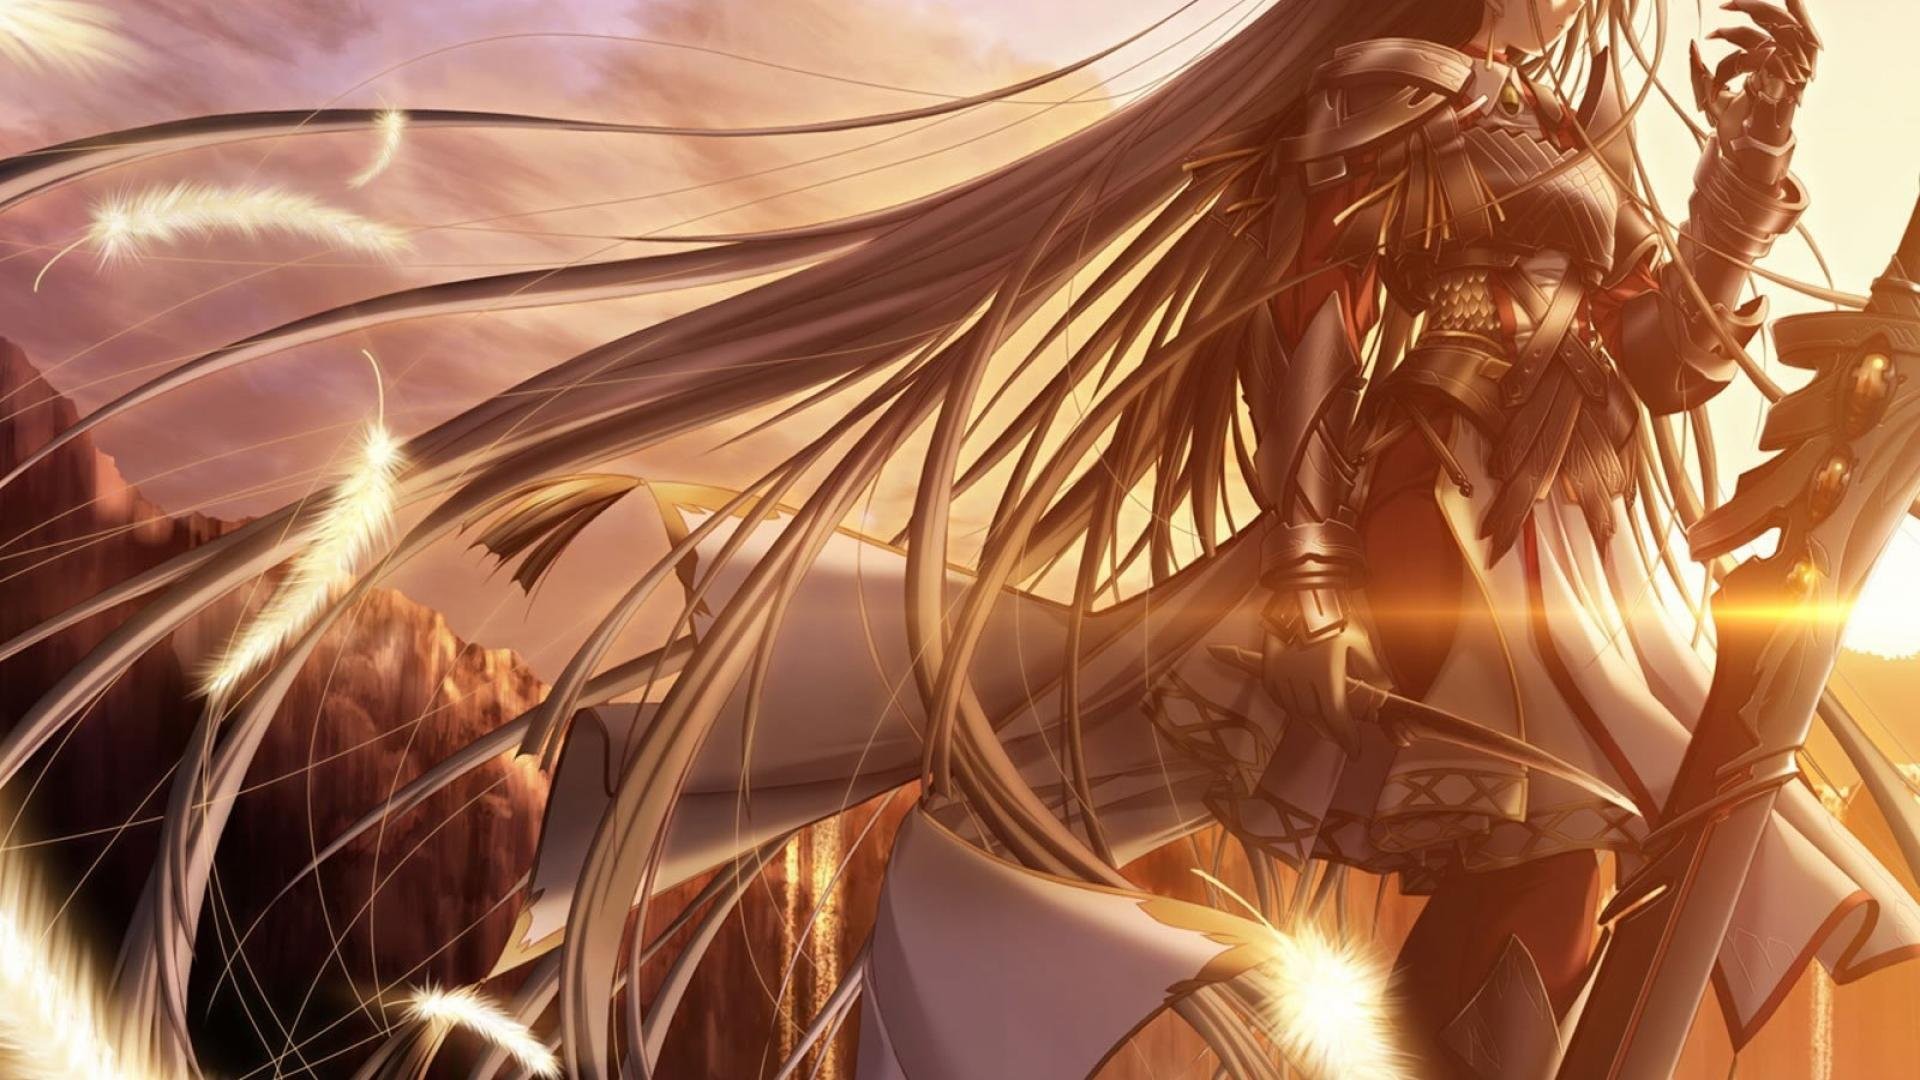 1920x1080 Beautiful Anime Characters. SHARE. TAGS: Images Female Warrior Fantasy Anime